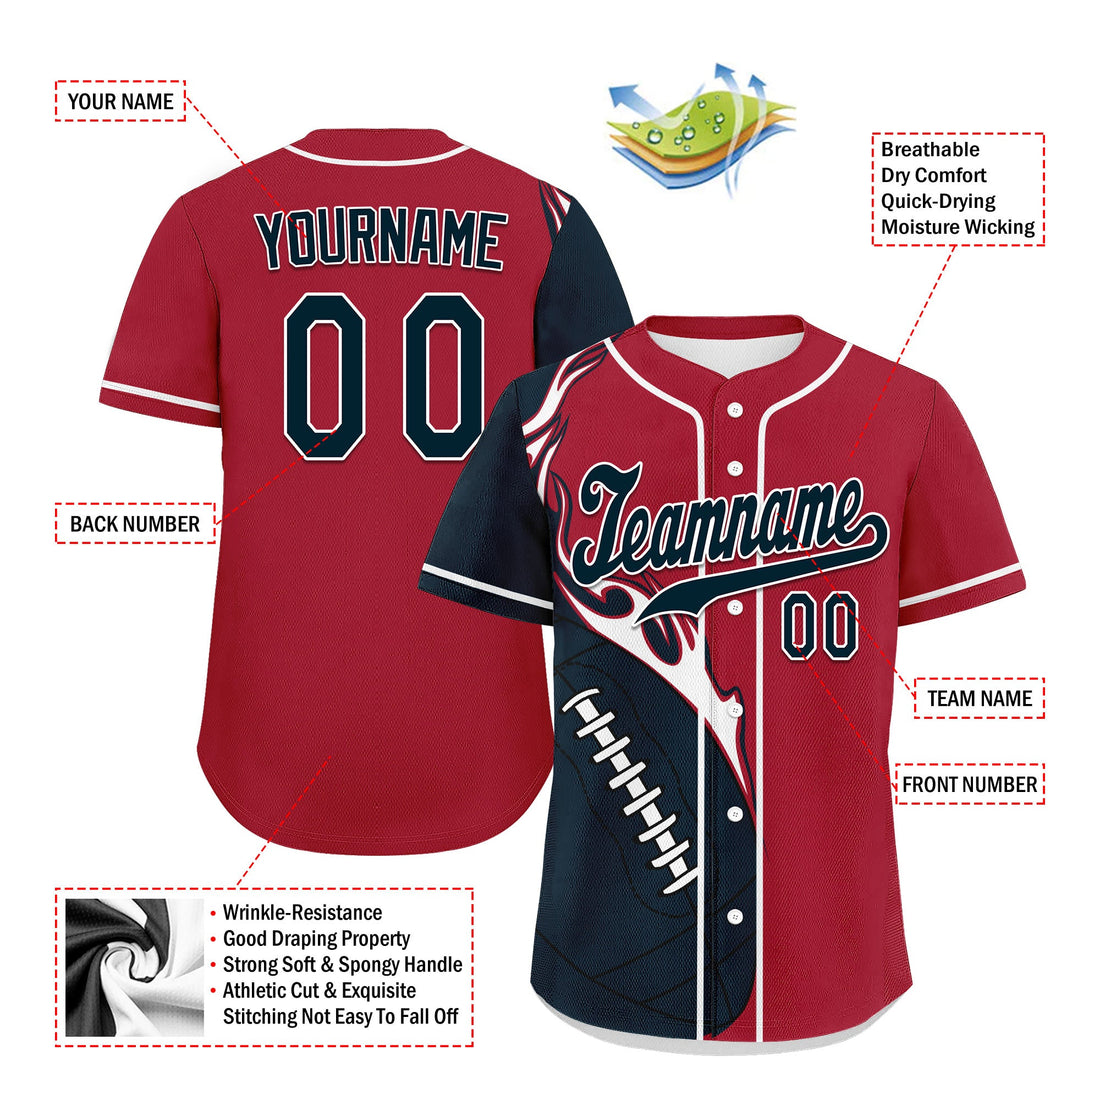 Custom Red Black Classic Style Personalized Authentic Baseball Jersey UN002-D0b0a00-ab